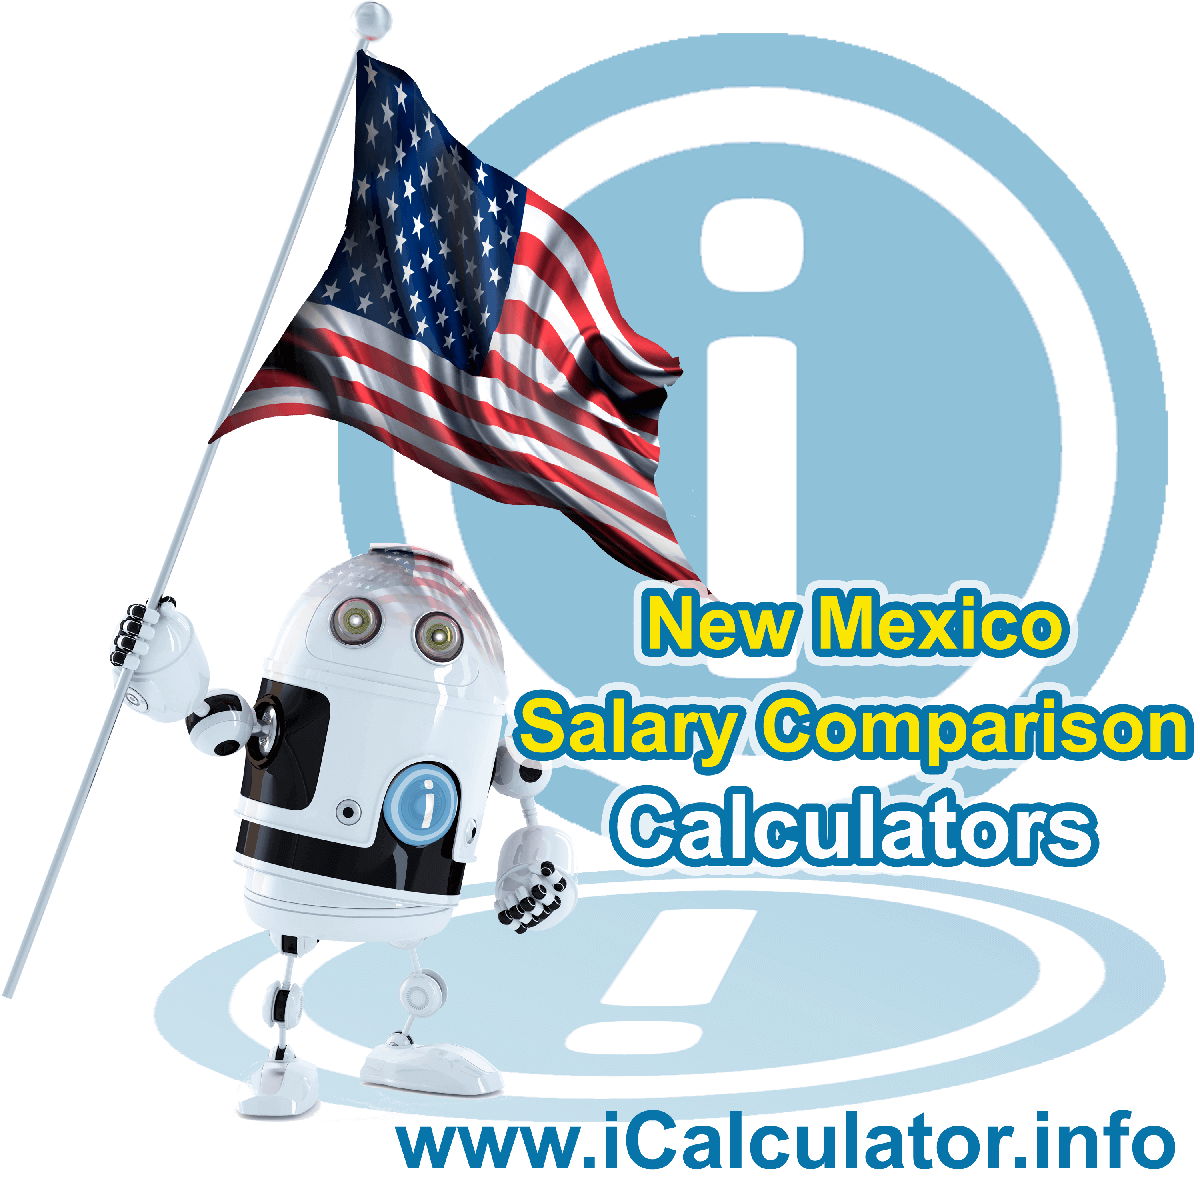 New Mexico Salary Comparison Calculator 2024 | iCalculator™ | The New Mexico Salary Comparison Calculator allows you to quickly calculate and compare upto 6 salaries in New Mexico or compare with other states for the 2024 tax year and historical tax years. 